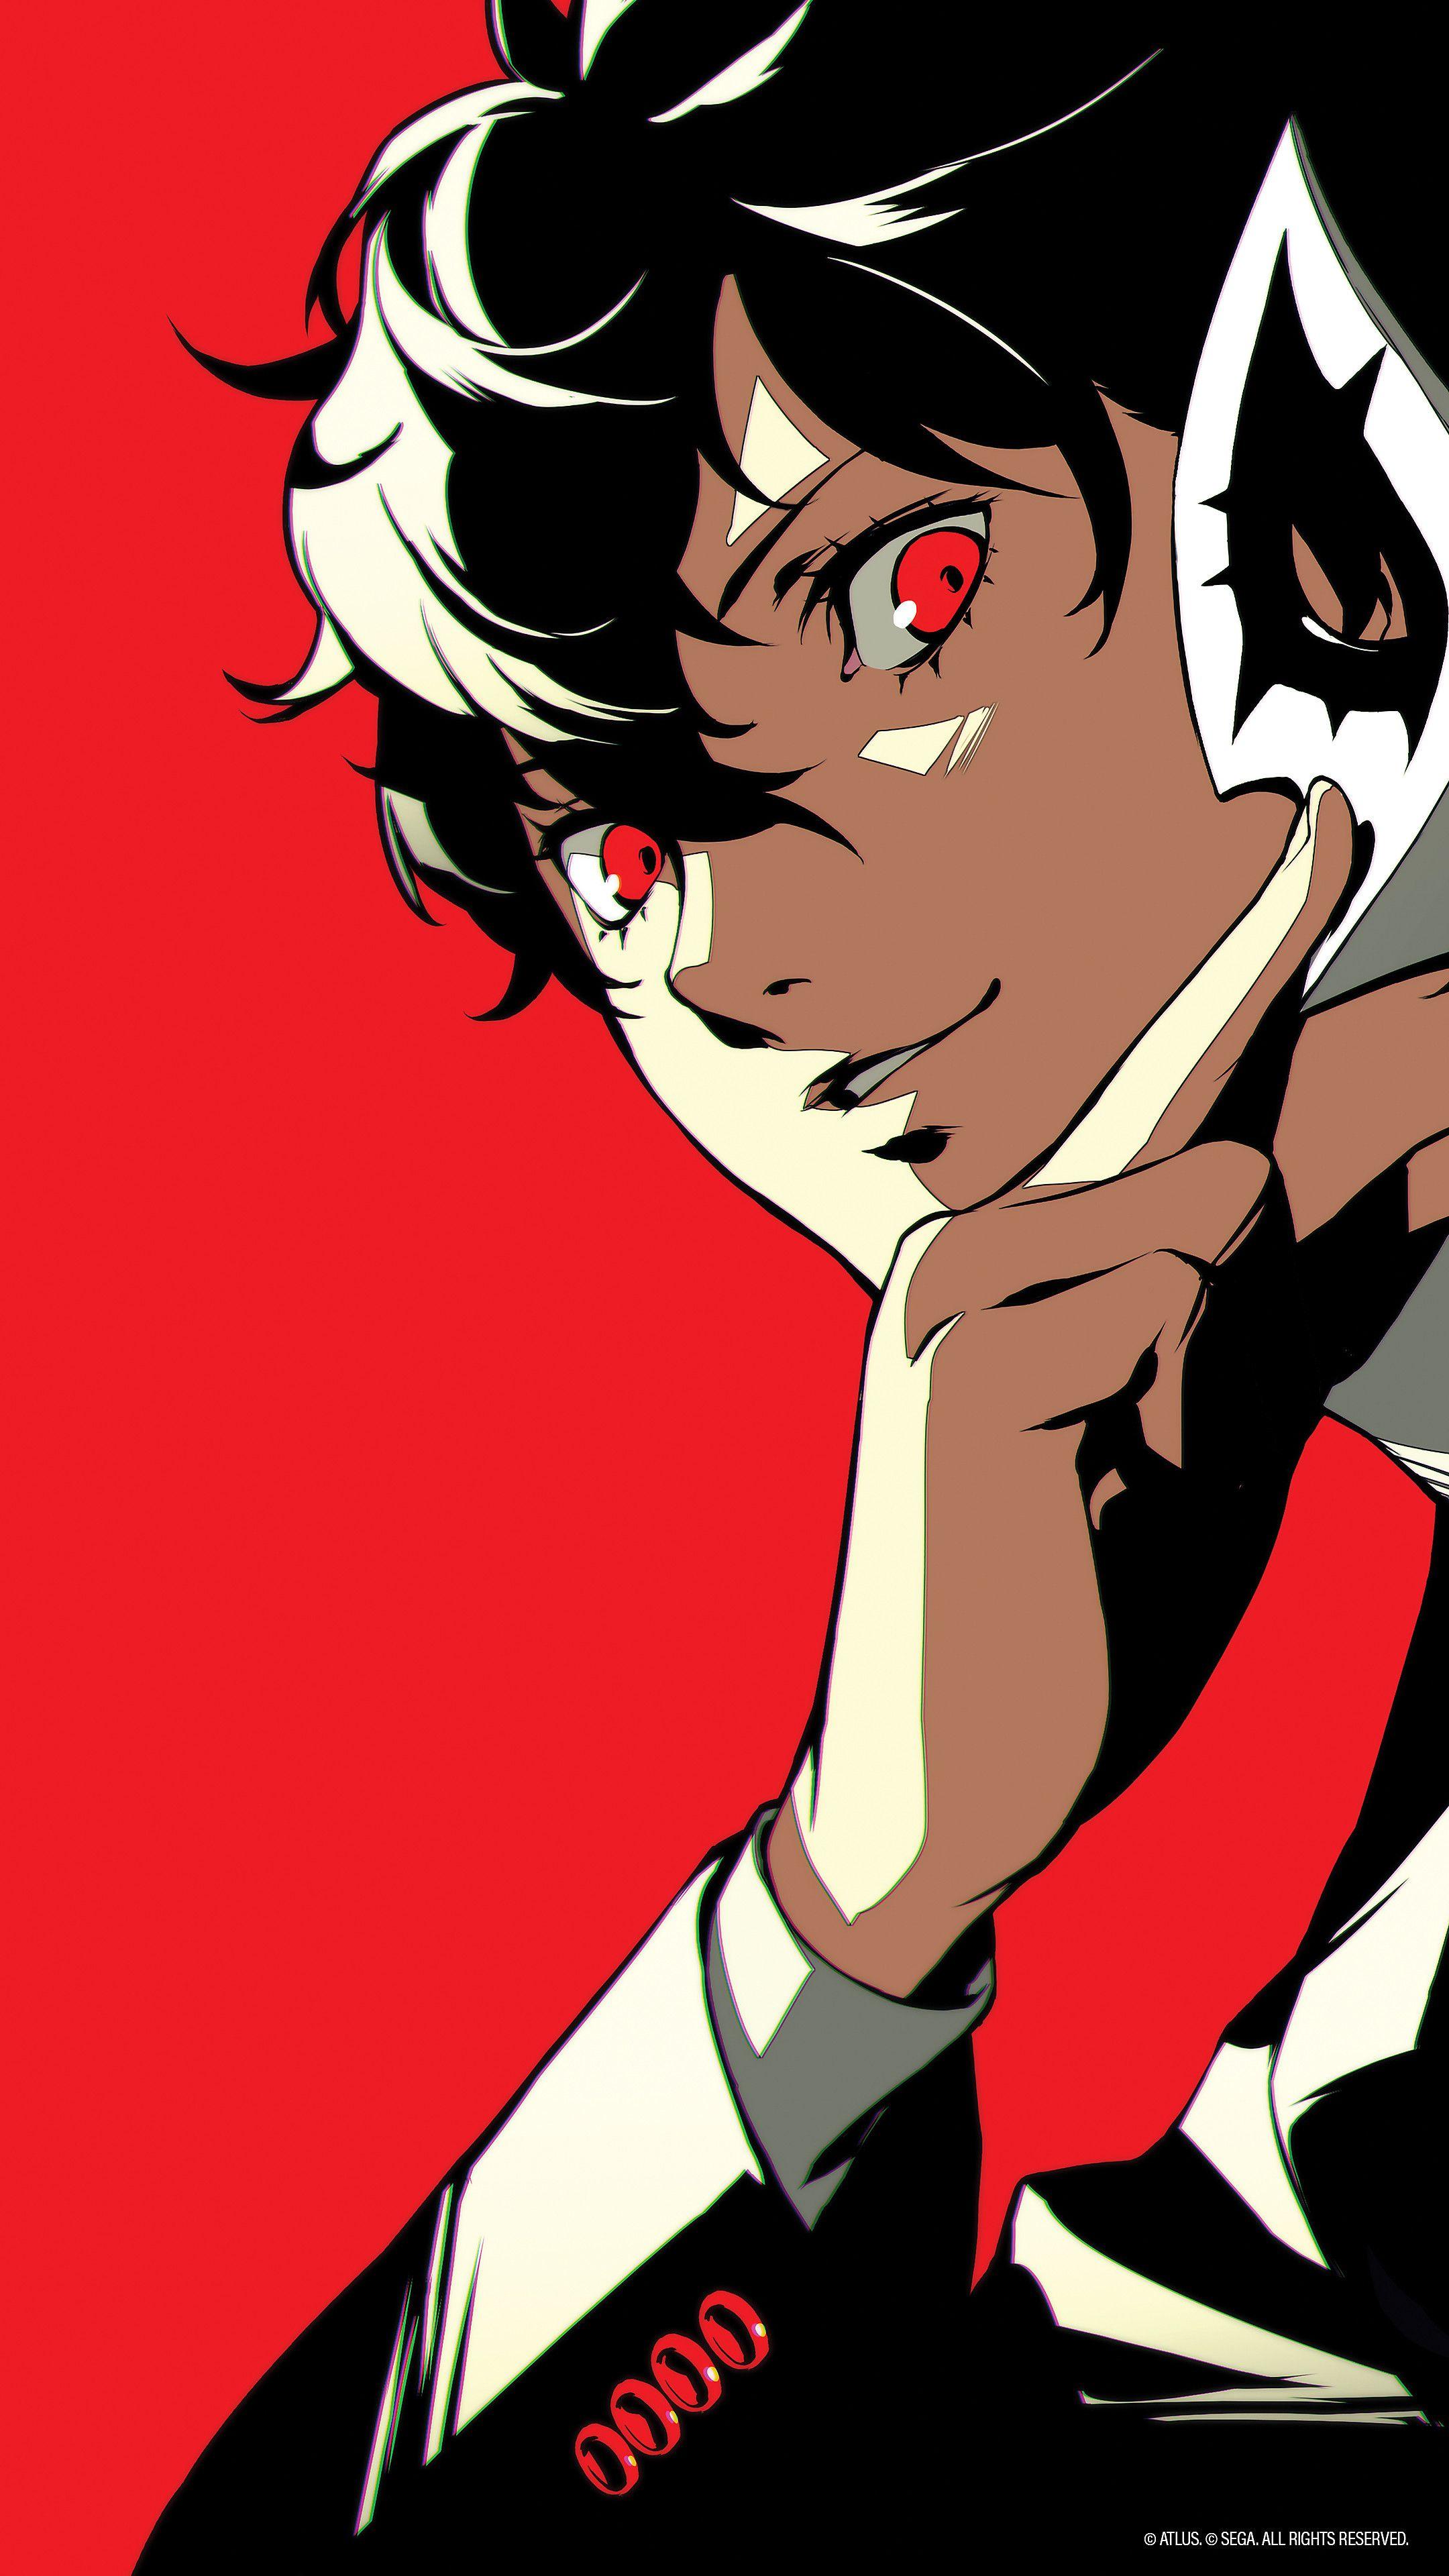 PERSONA 5 Wallpaper for iPhone 5 5c 5s SE by uzijin on DeviantArt